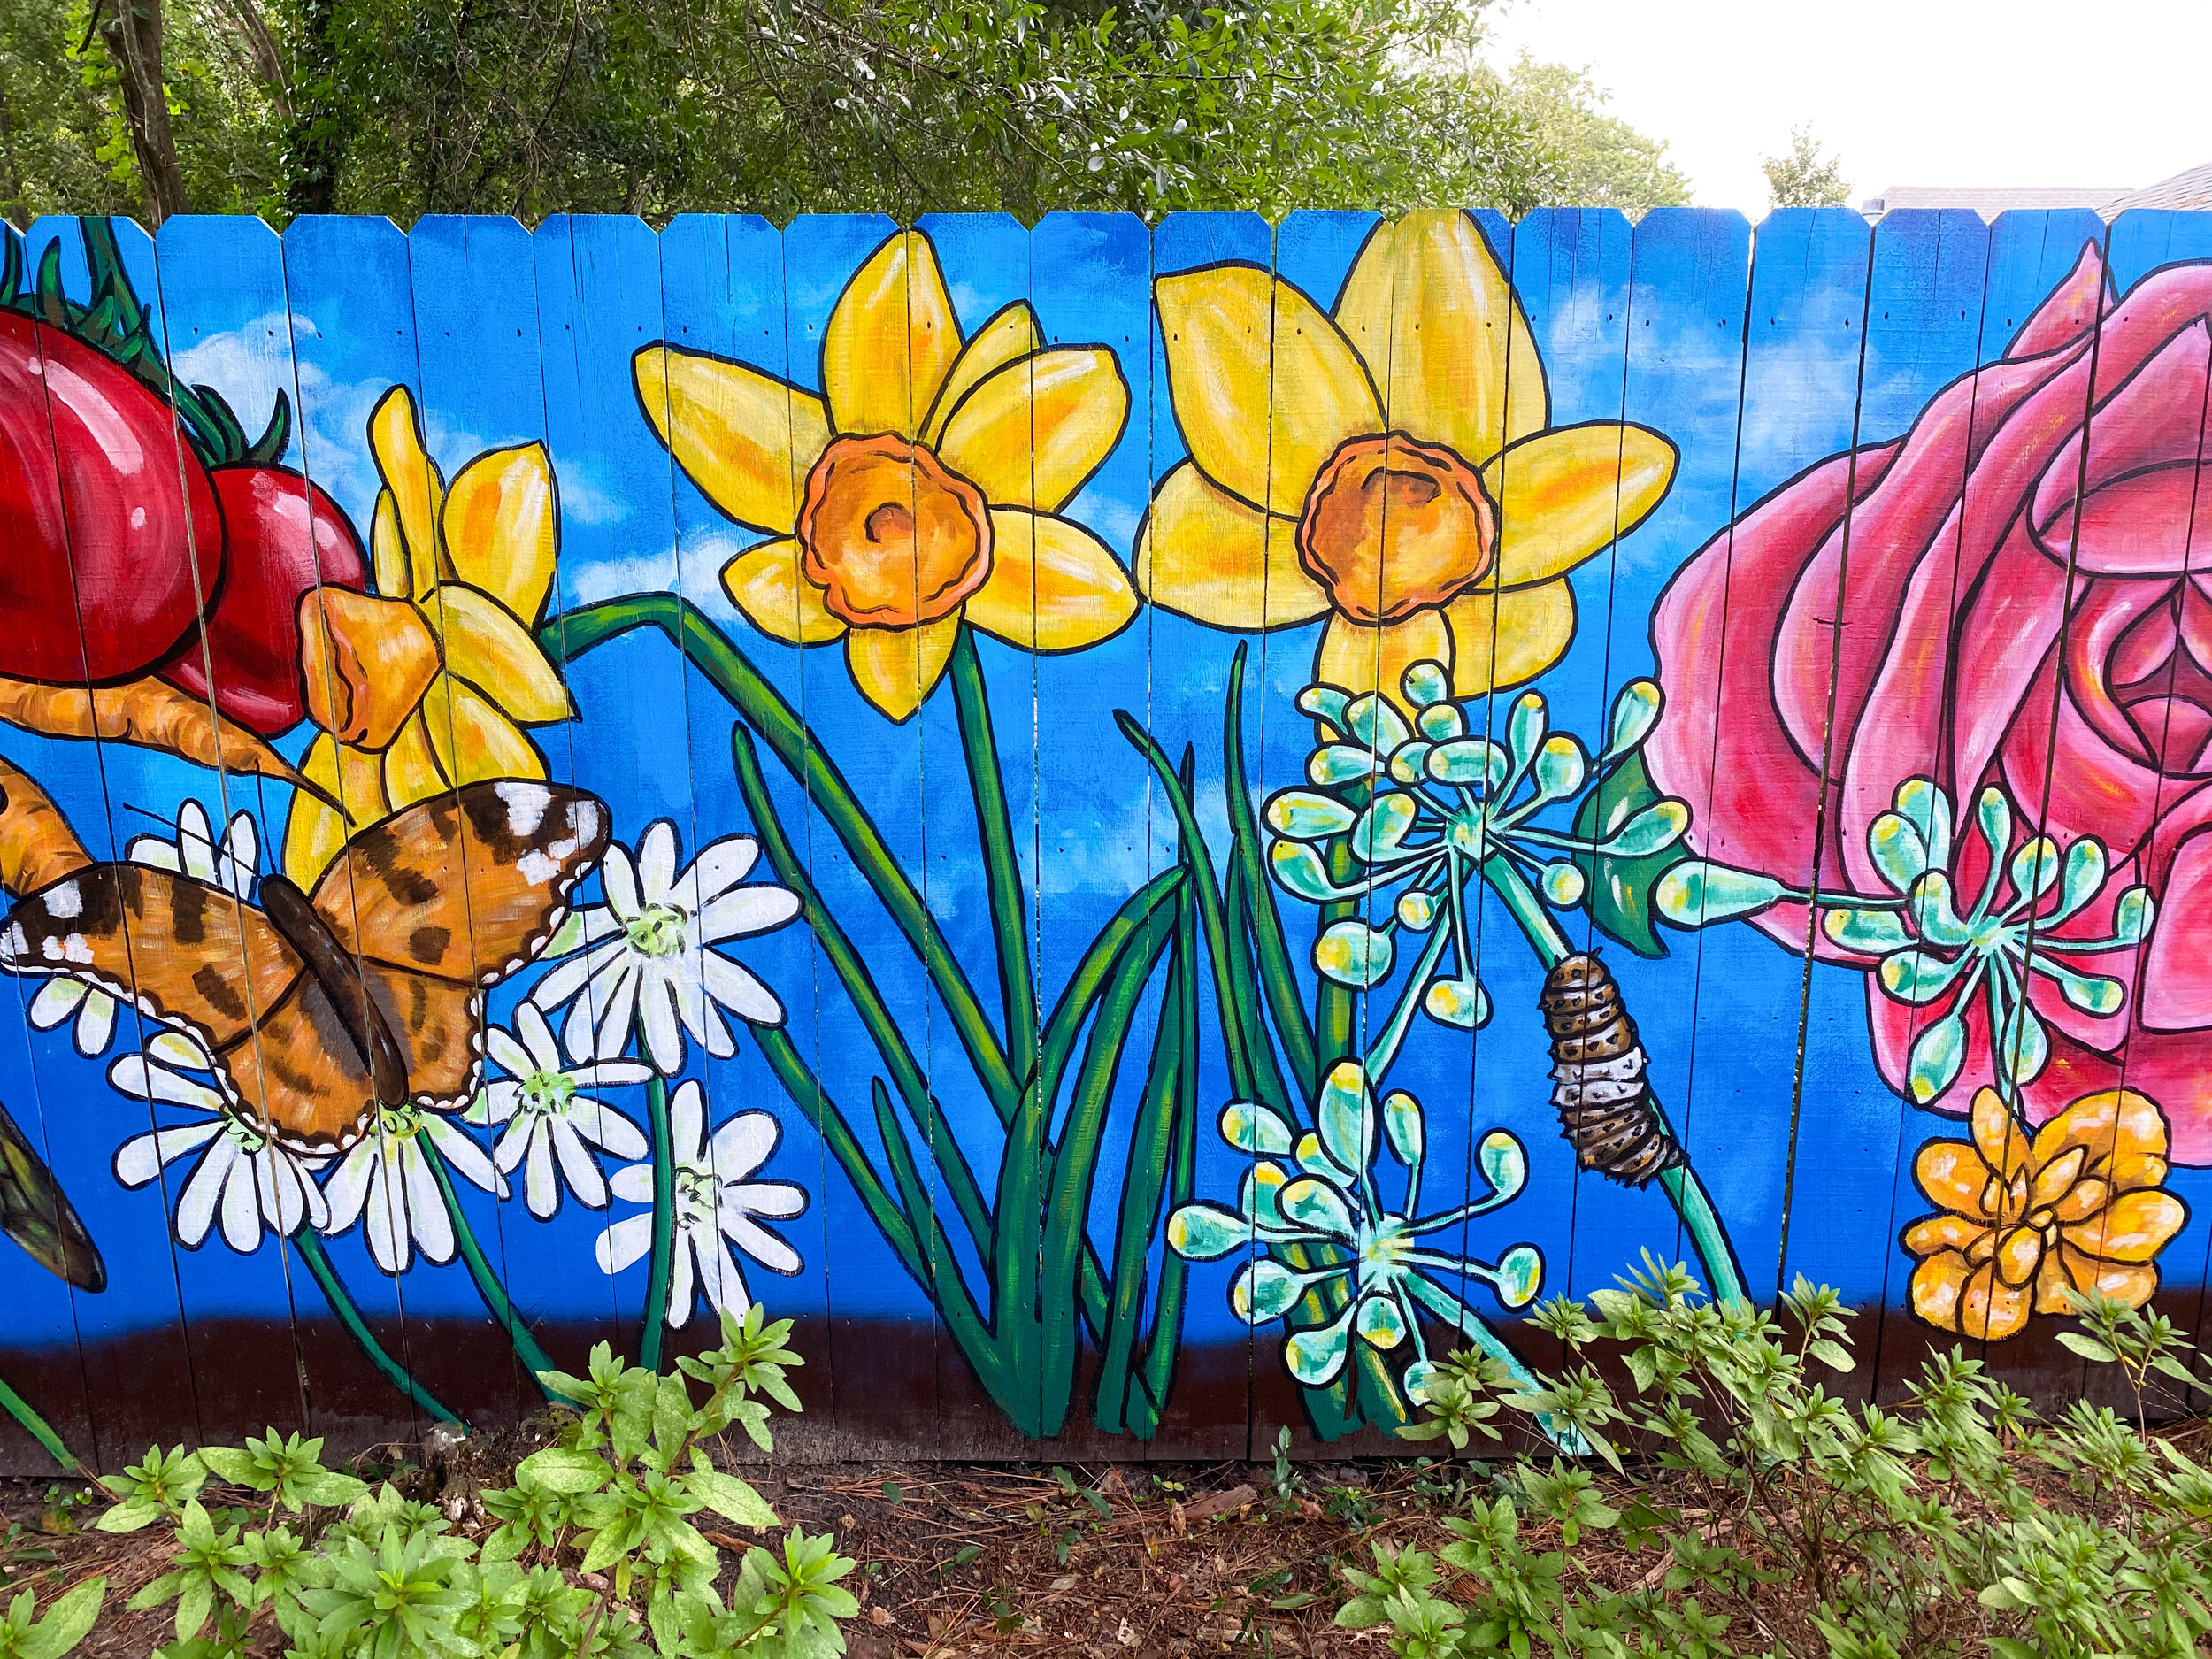   From Blight to Beauty  (detail). Old Cloverdale Community Garden mural, Montgomery, AL. 25’x6’ exterior latex on wood. October 2020. 